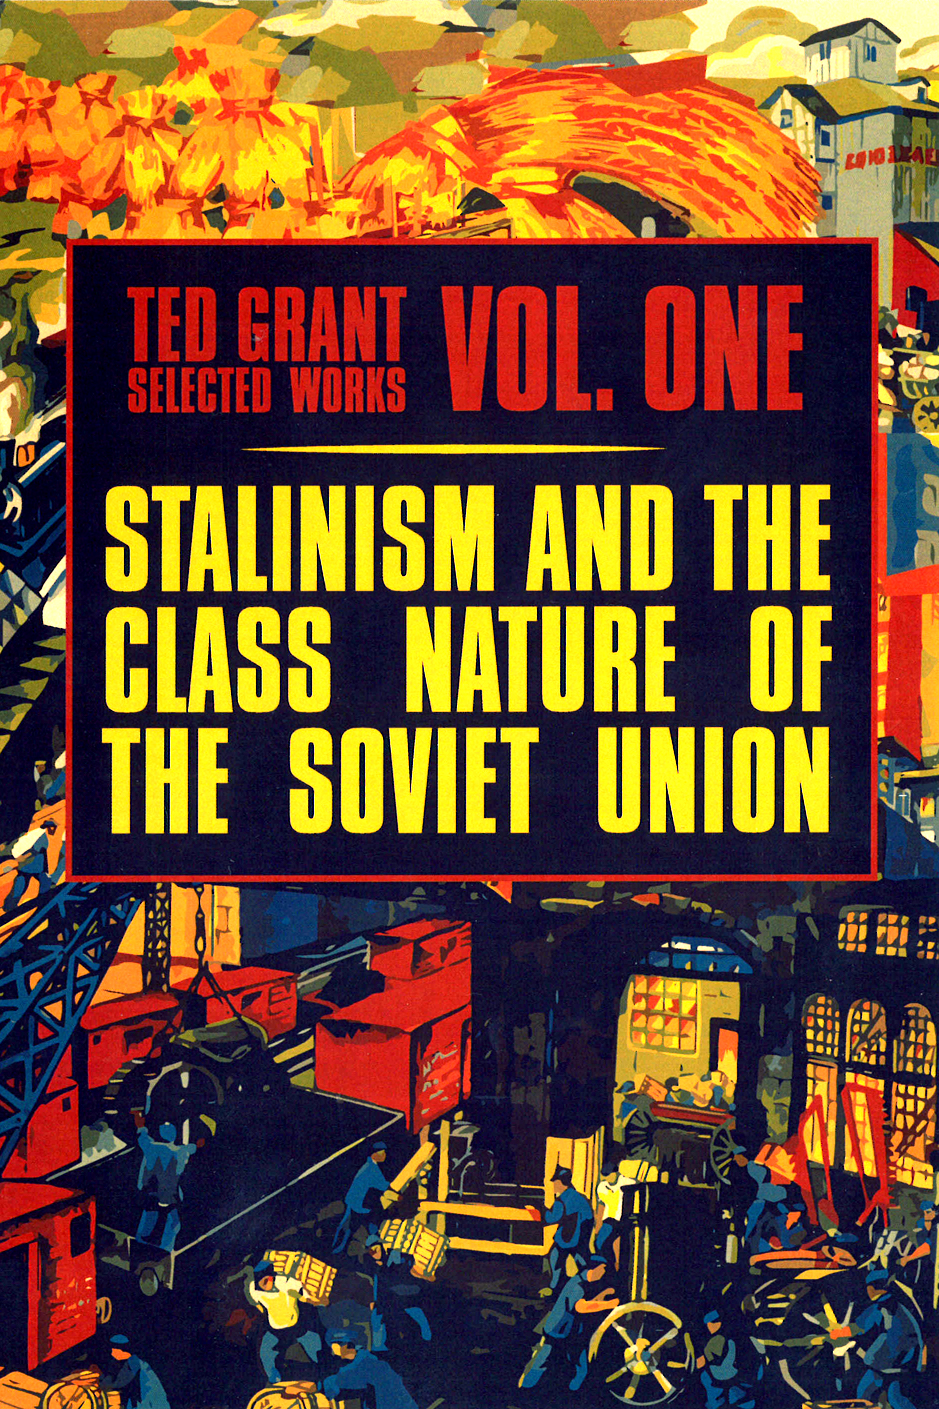 Ted Grant Selected Works: Volume One: Stalinism and the Class Nature of the Soviet Union